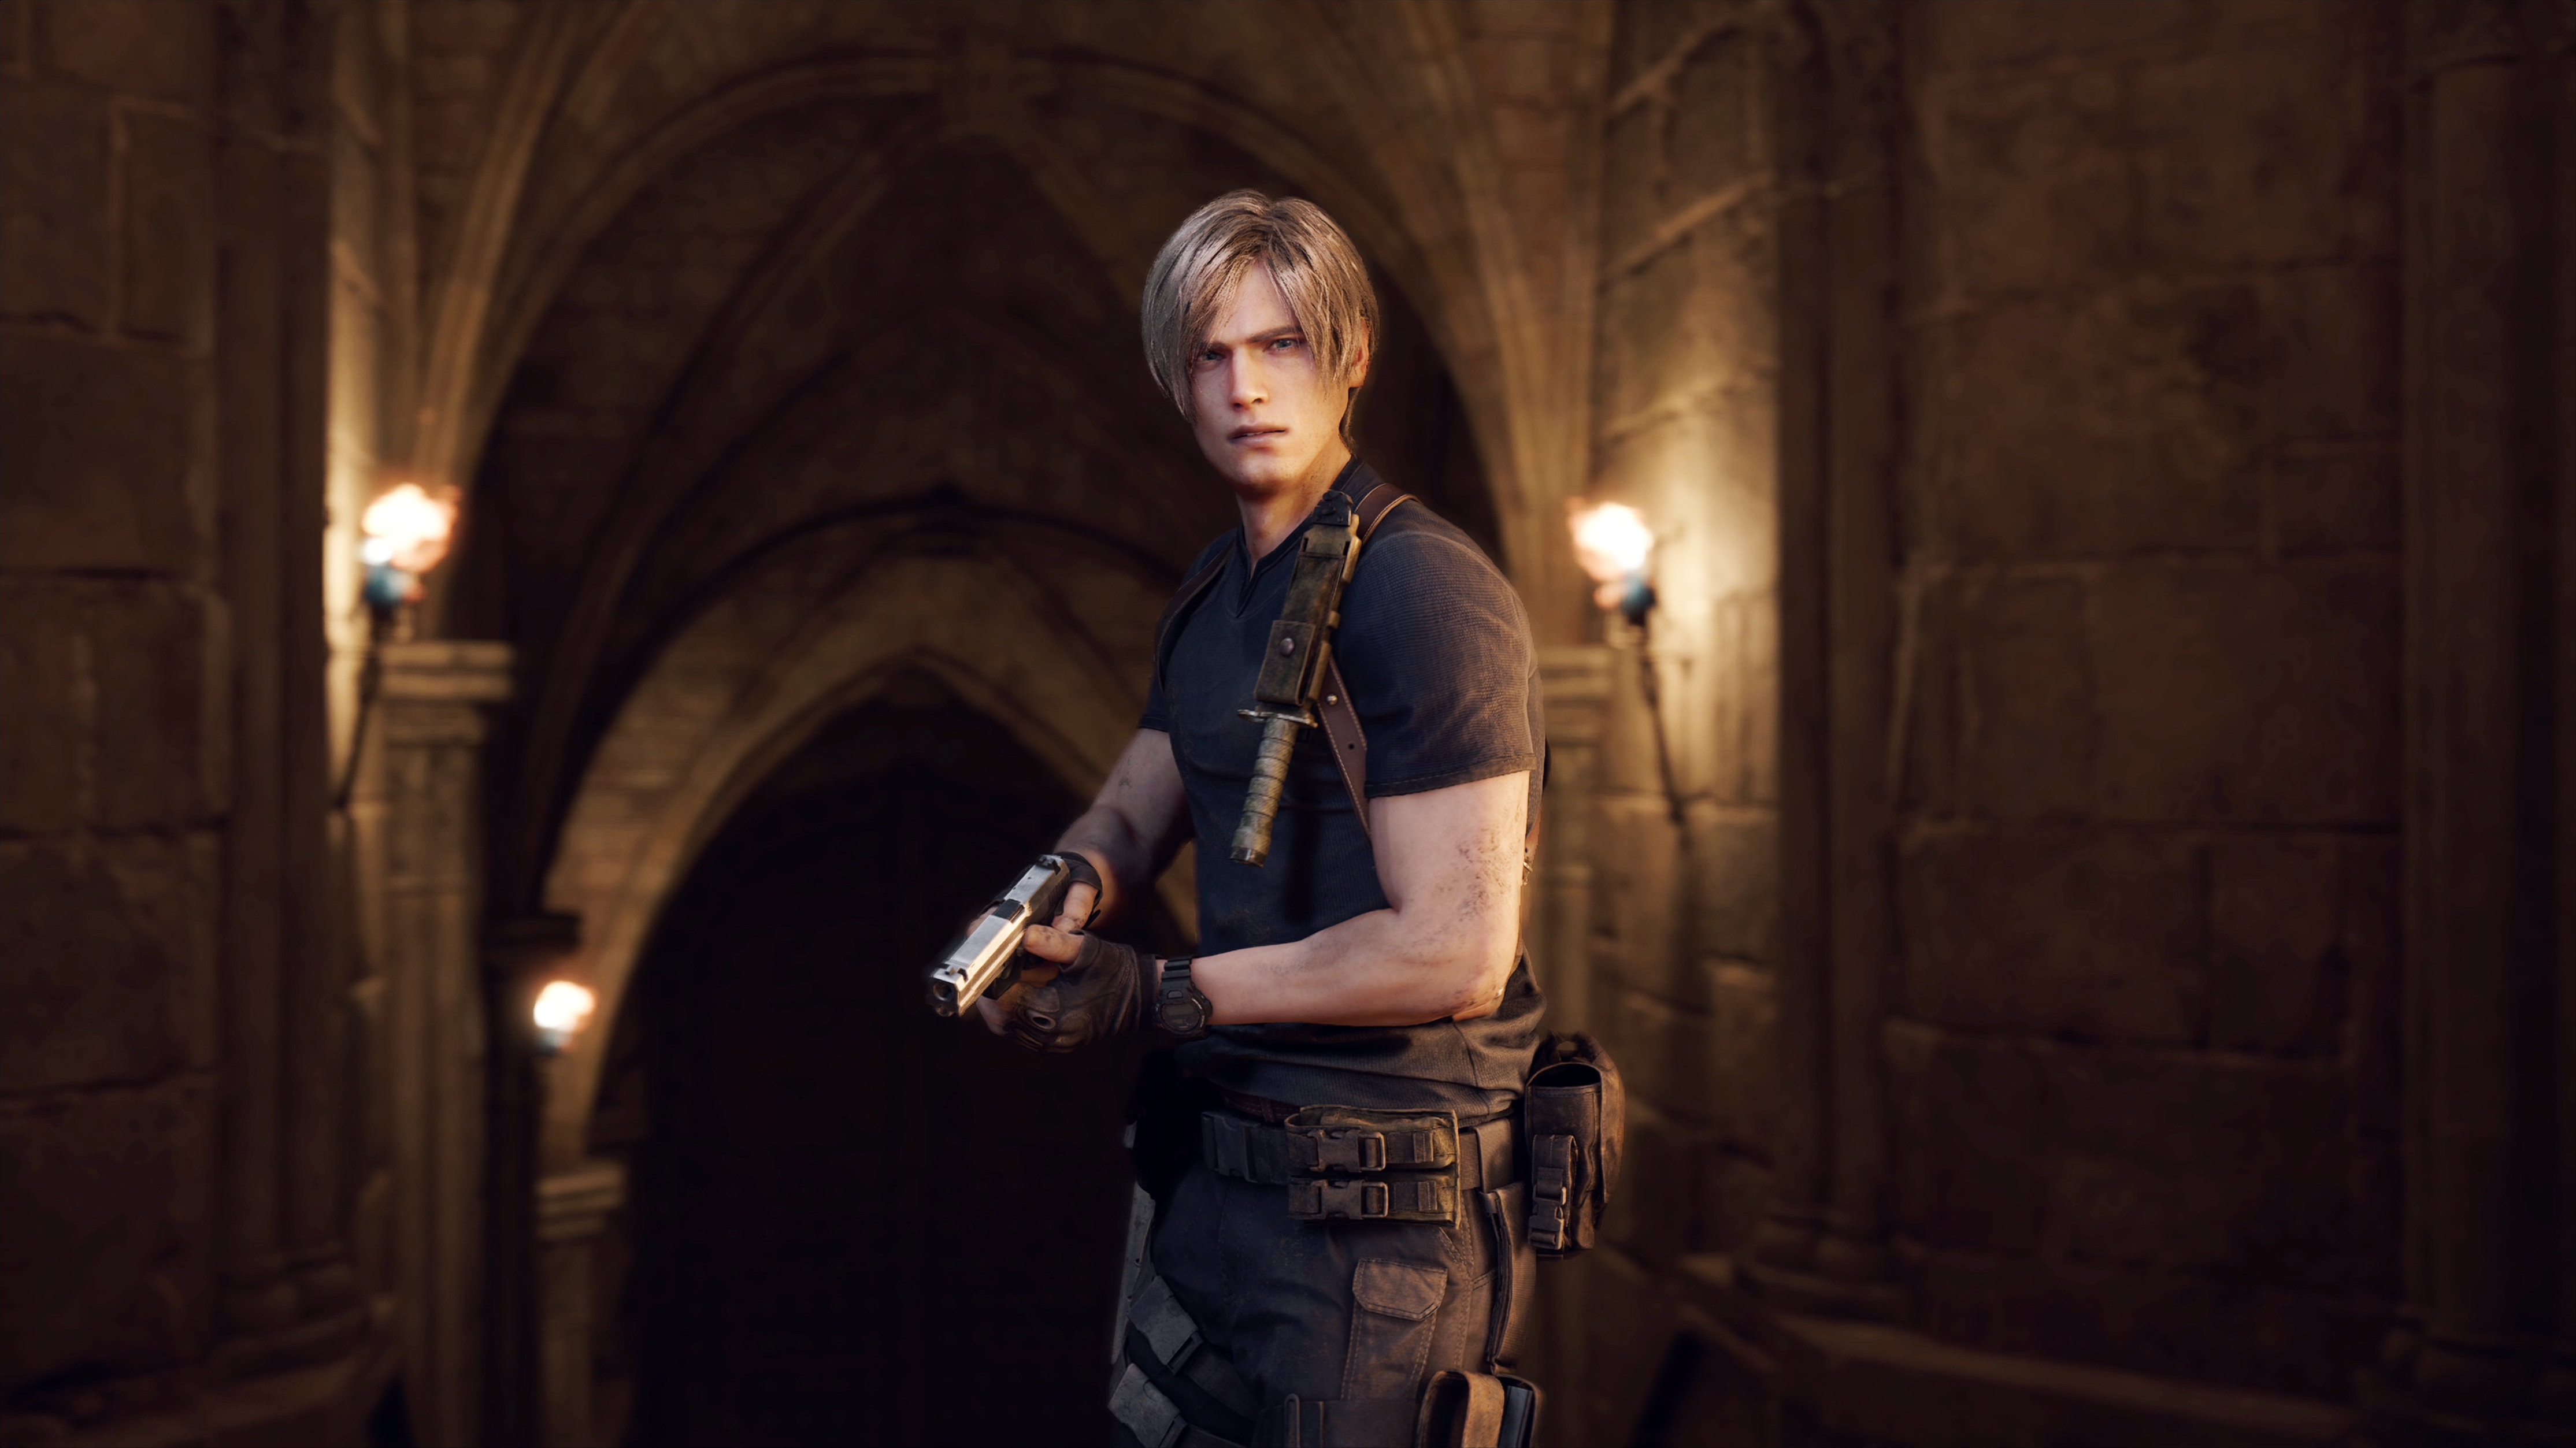 Resident Evil 4 Game Remake Launches for Mac, iPhone, iPad on December 20 -  News - Anime News Network